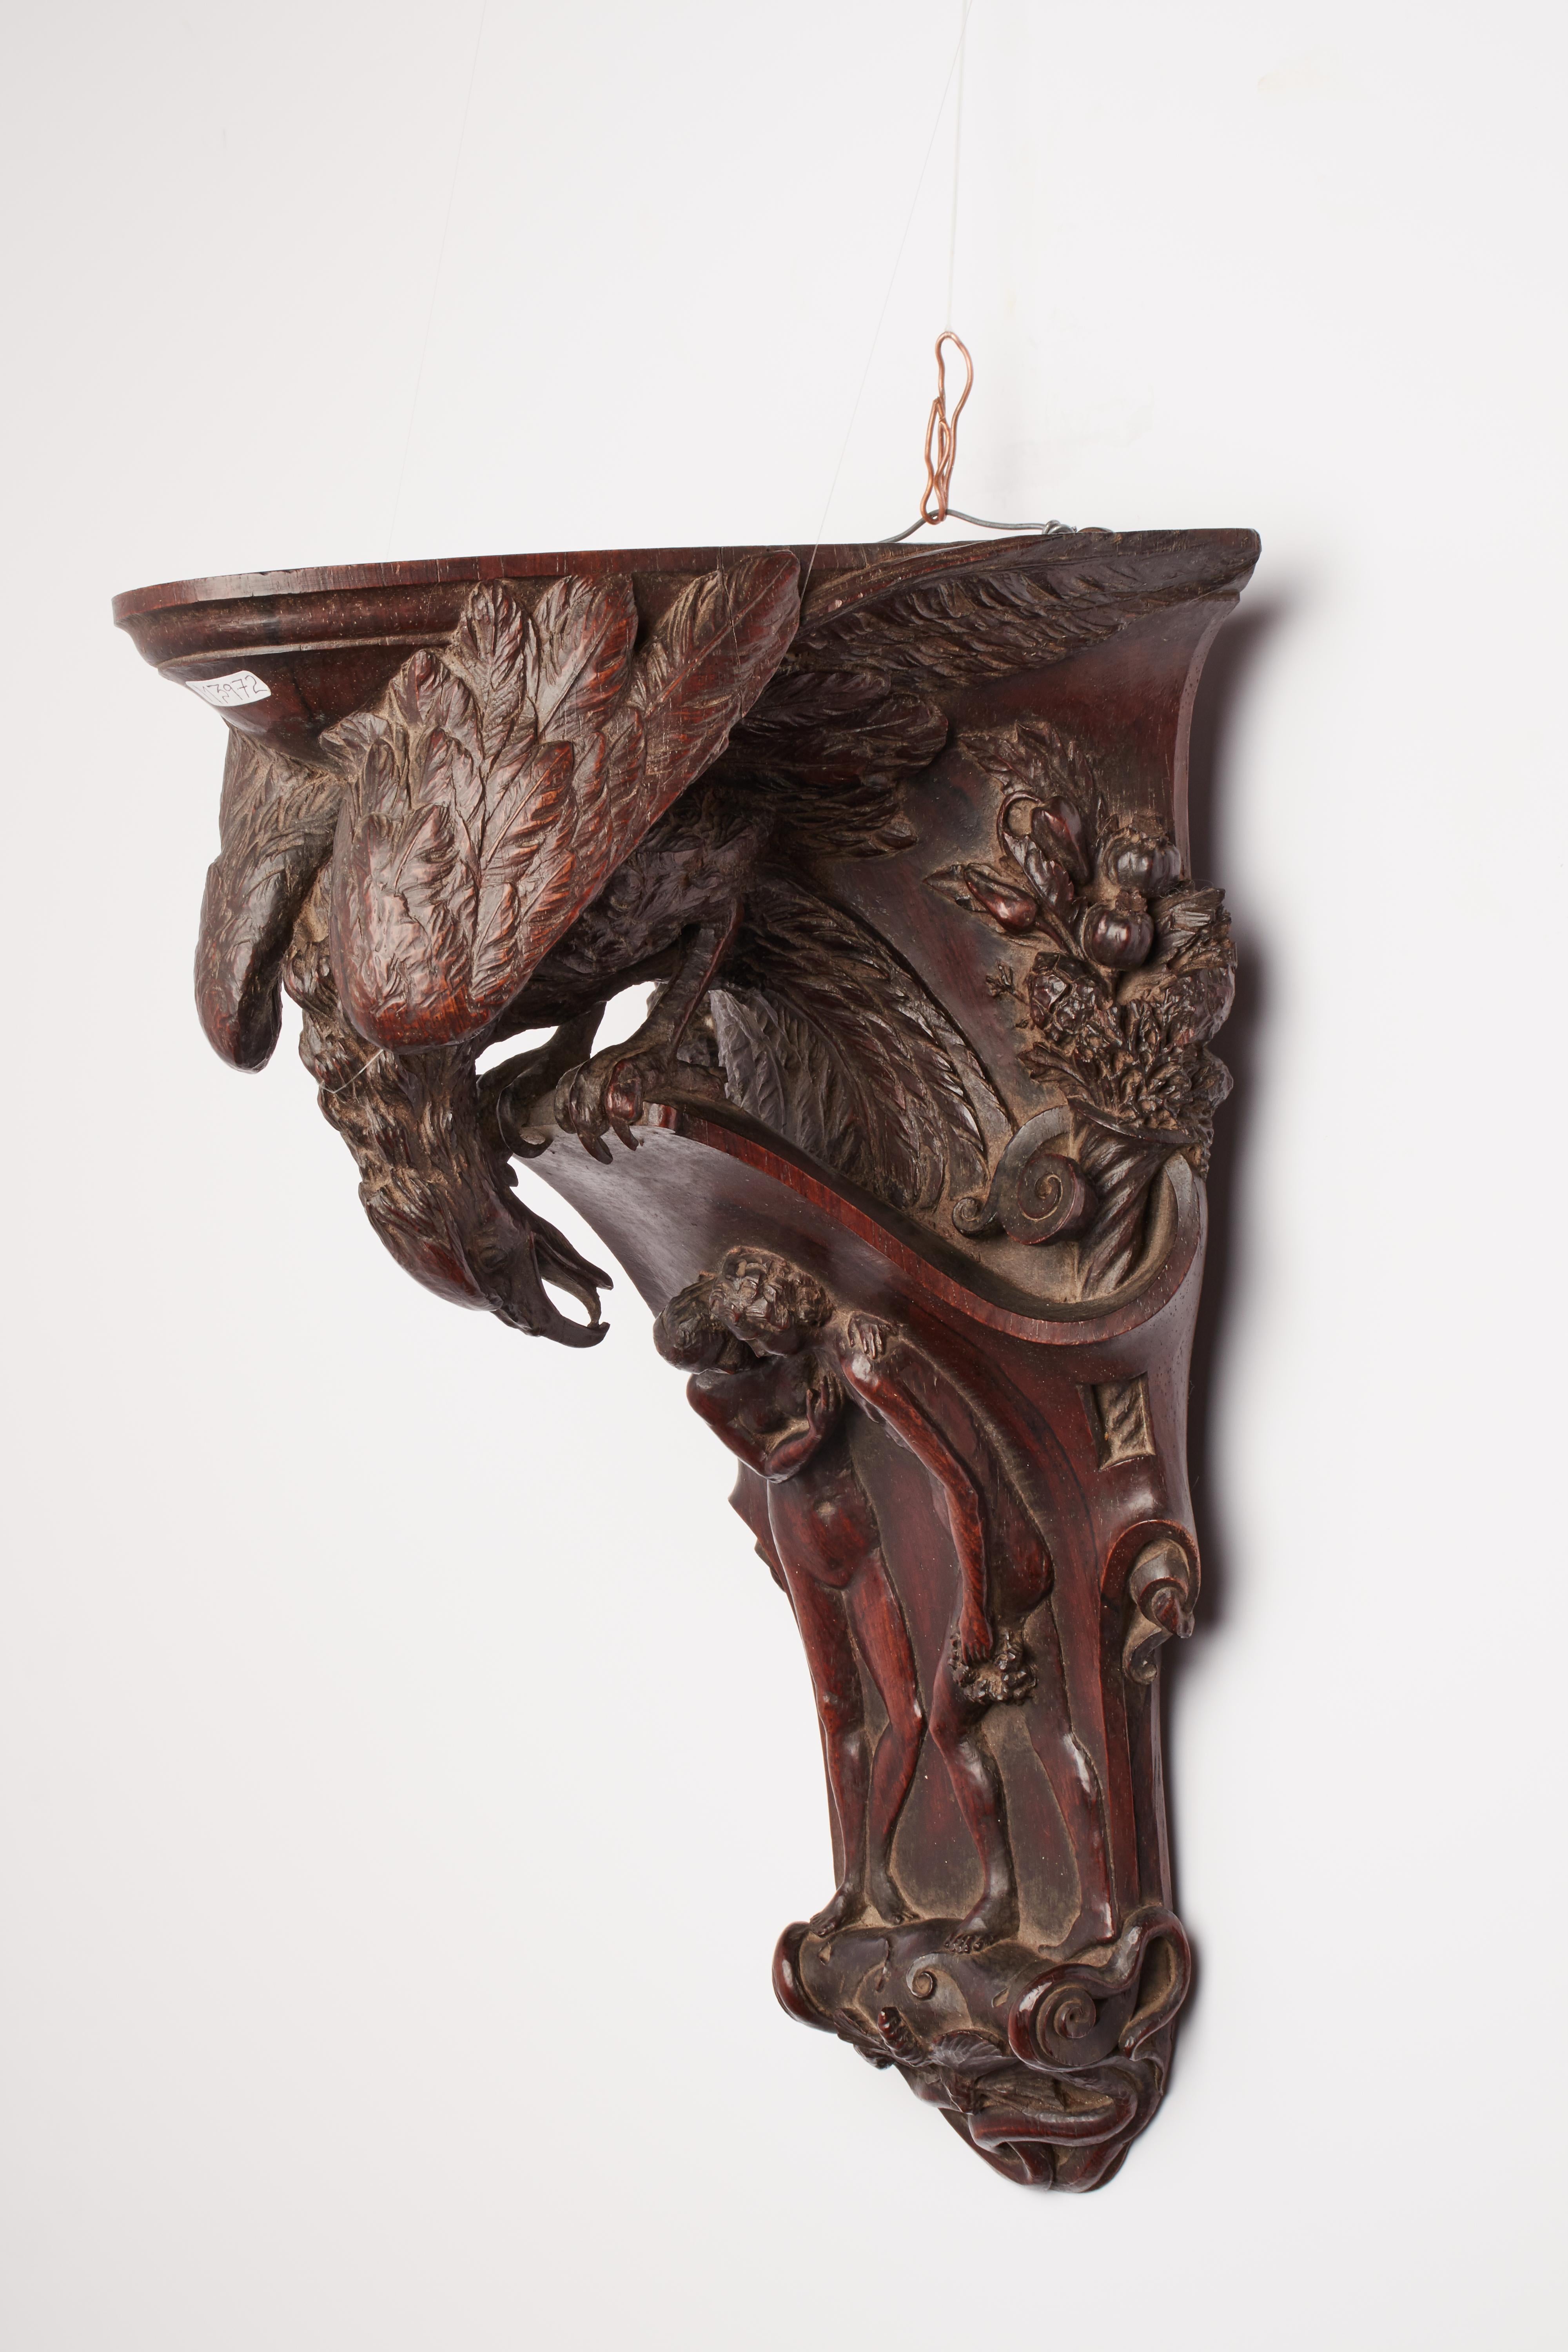 Little shelf, carved rosewood, depicting an eagle watching Adam, Eve, and a bee. Signed G.Benelli, Italy 1831.